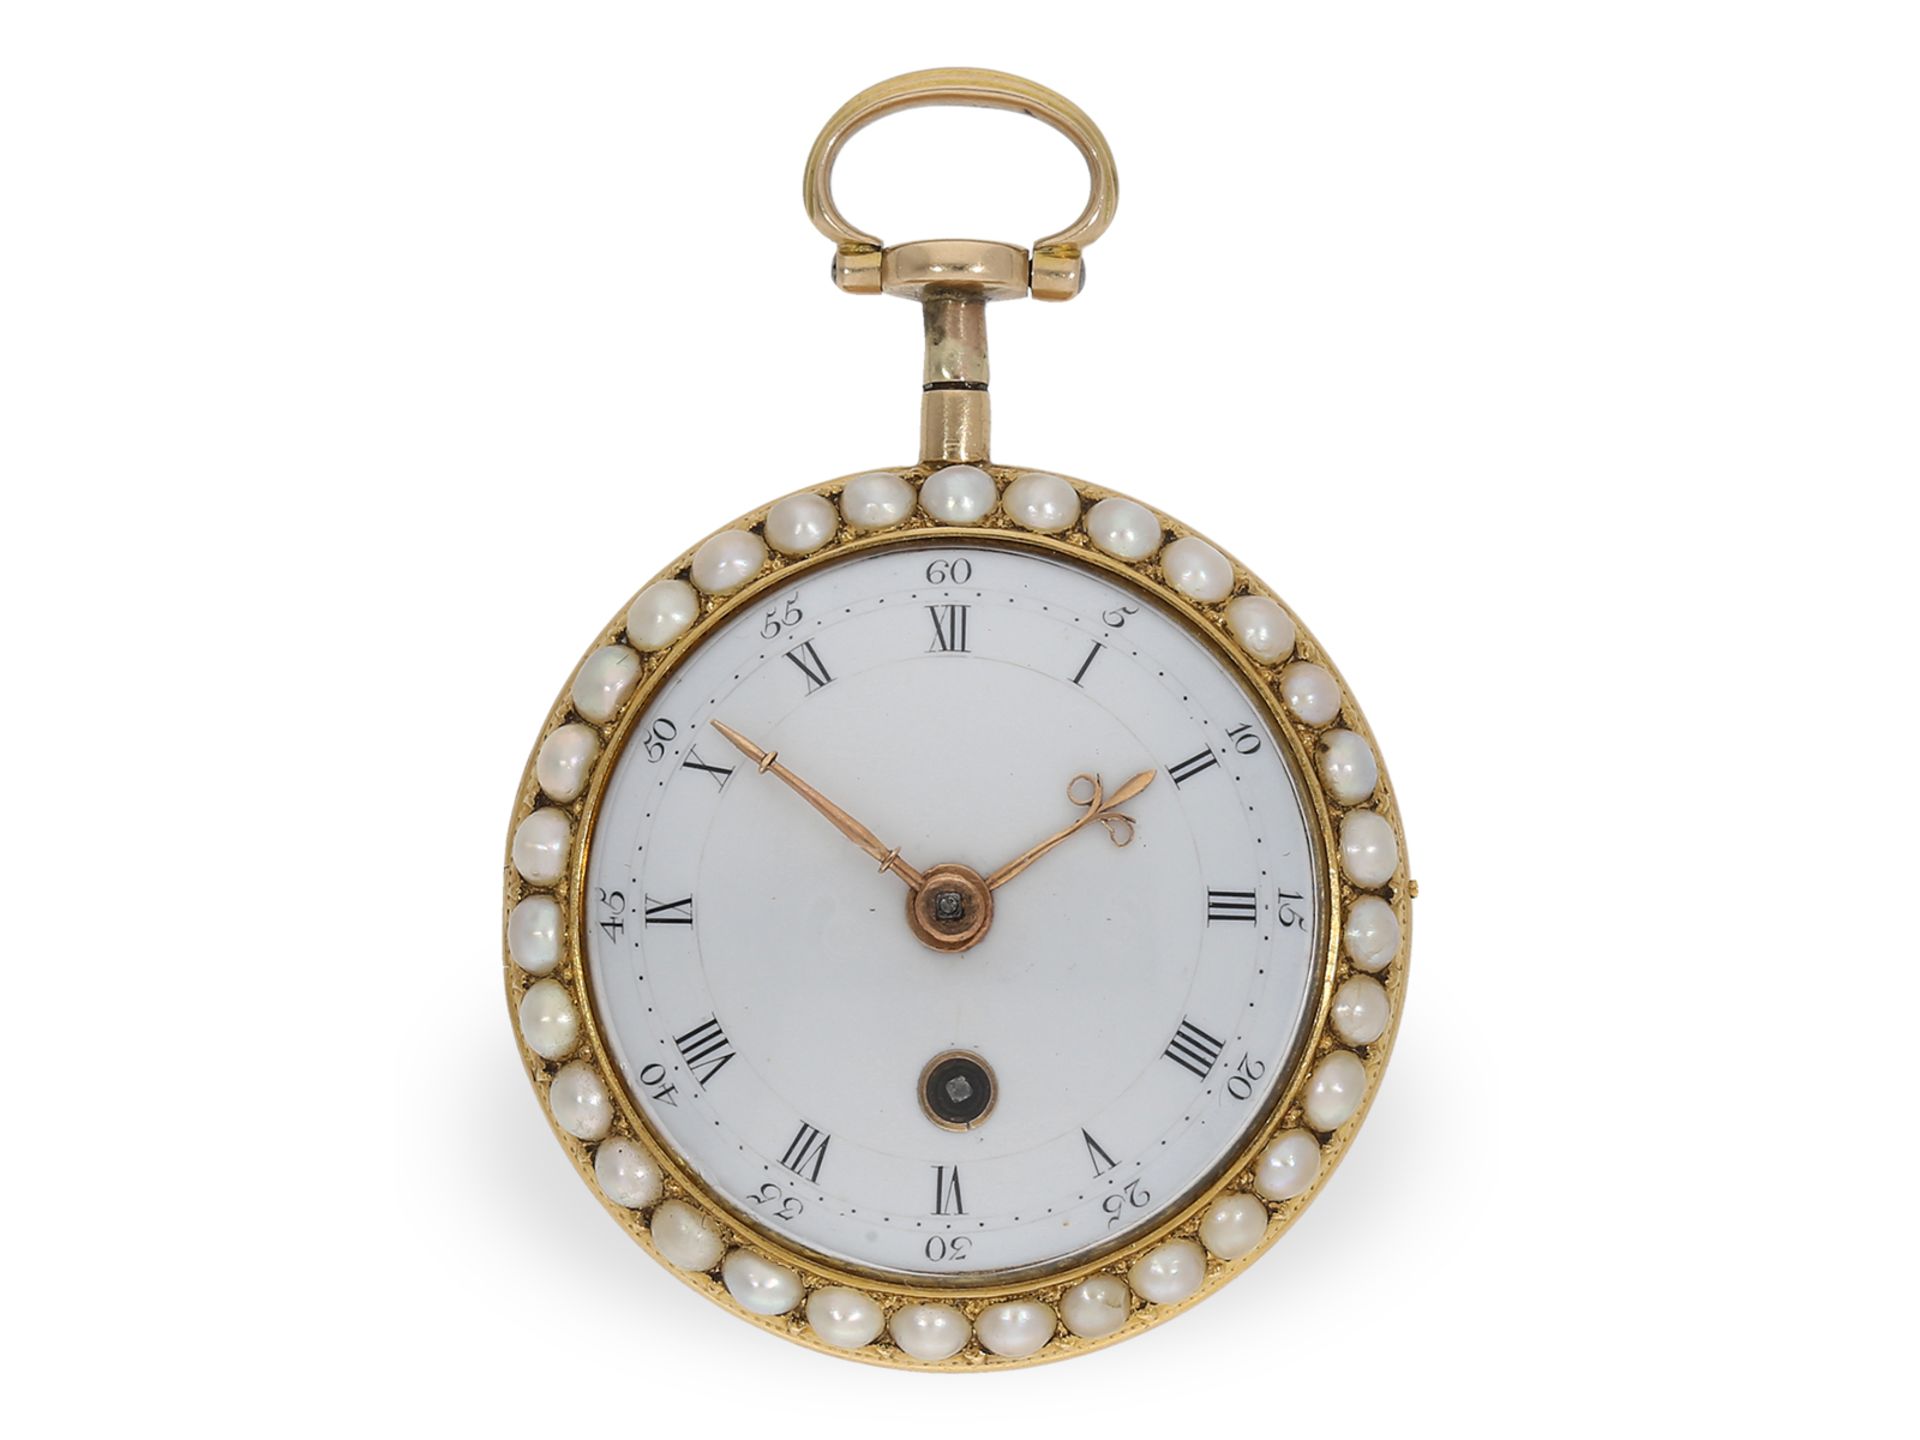 Pocket watch: very fine English gold/enamel verge watch with Oriental pearl setting, ca. 1790 - Image 3 of 5